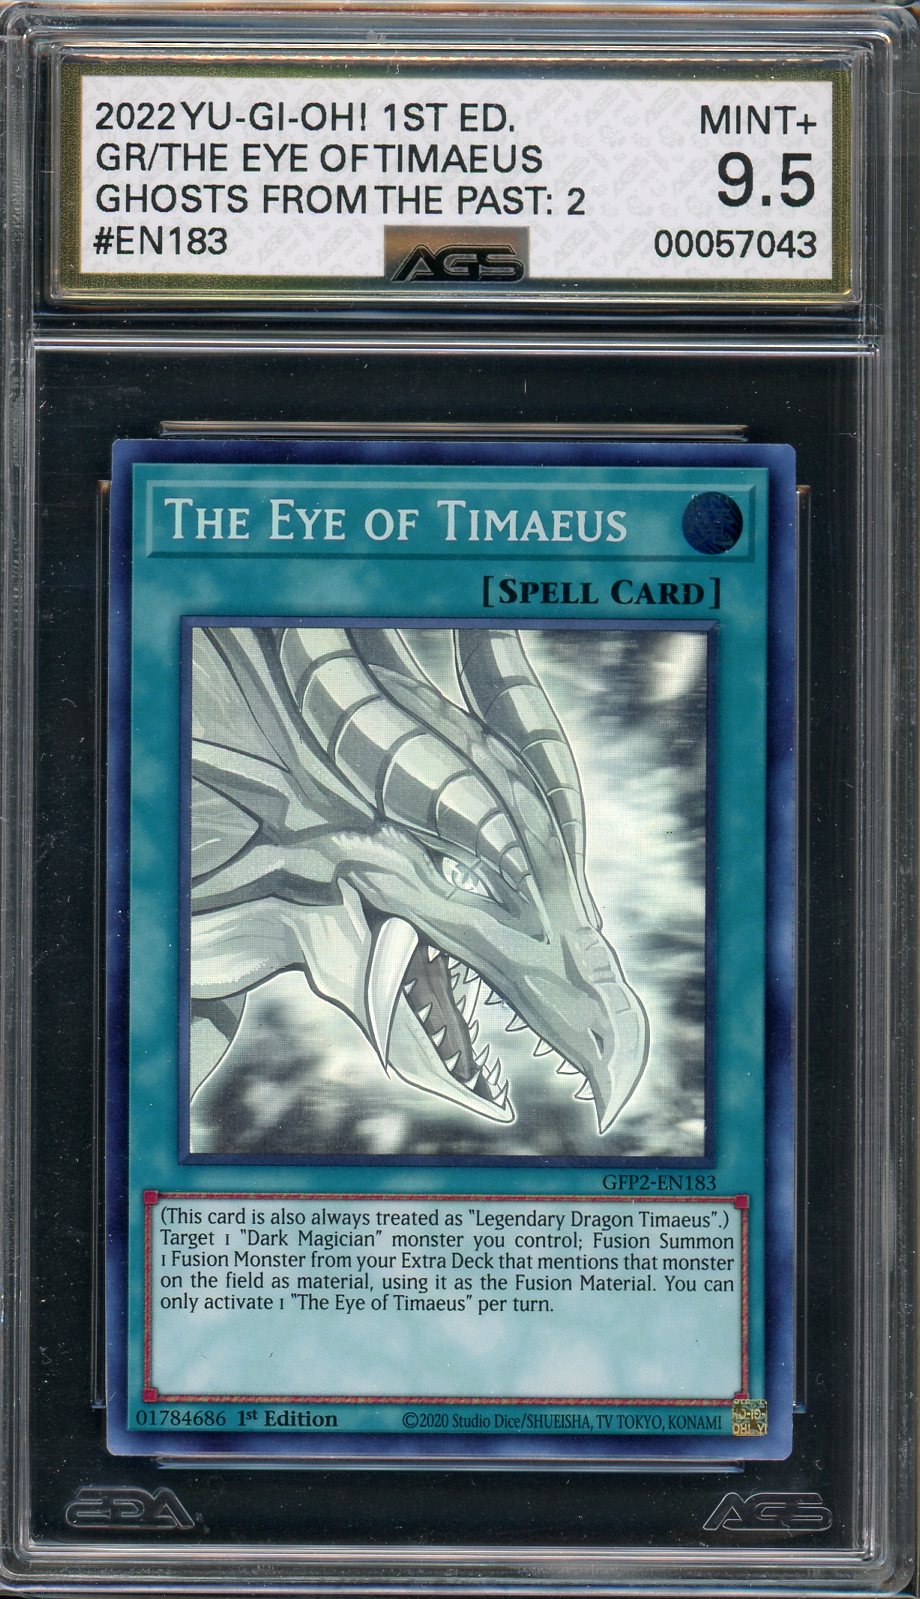 AGS (MINT+ 9.5) The Eye of Timaeus #EN183 - Ghosts From The Past The 2nd Haunting (#00057043)